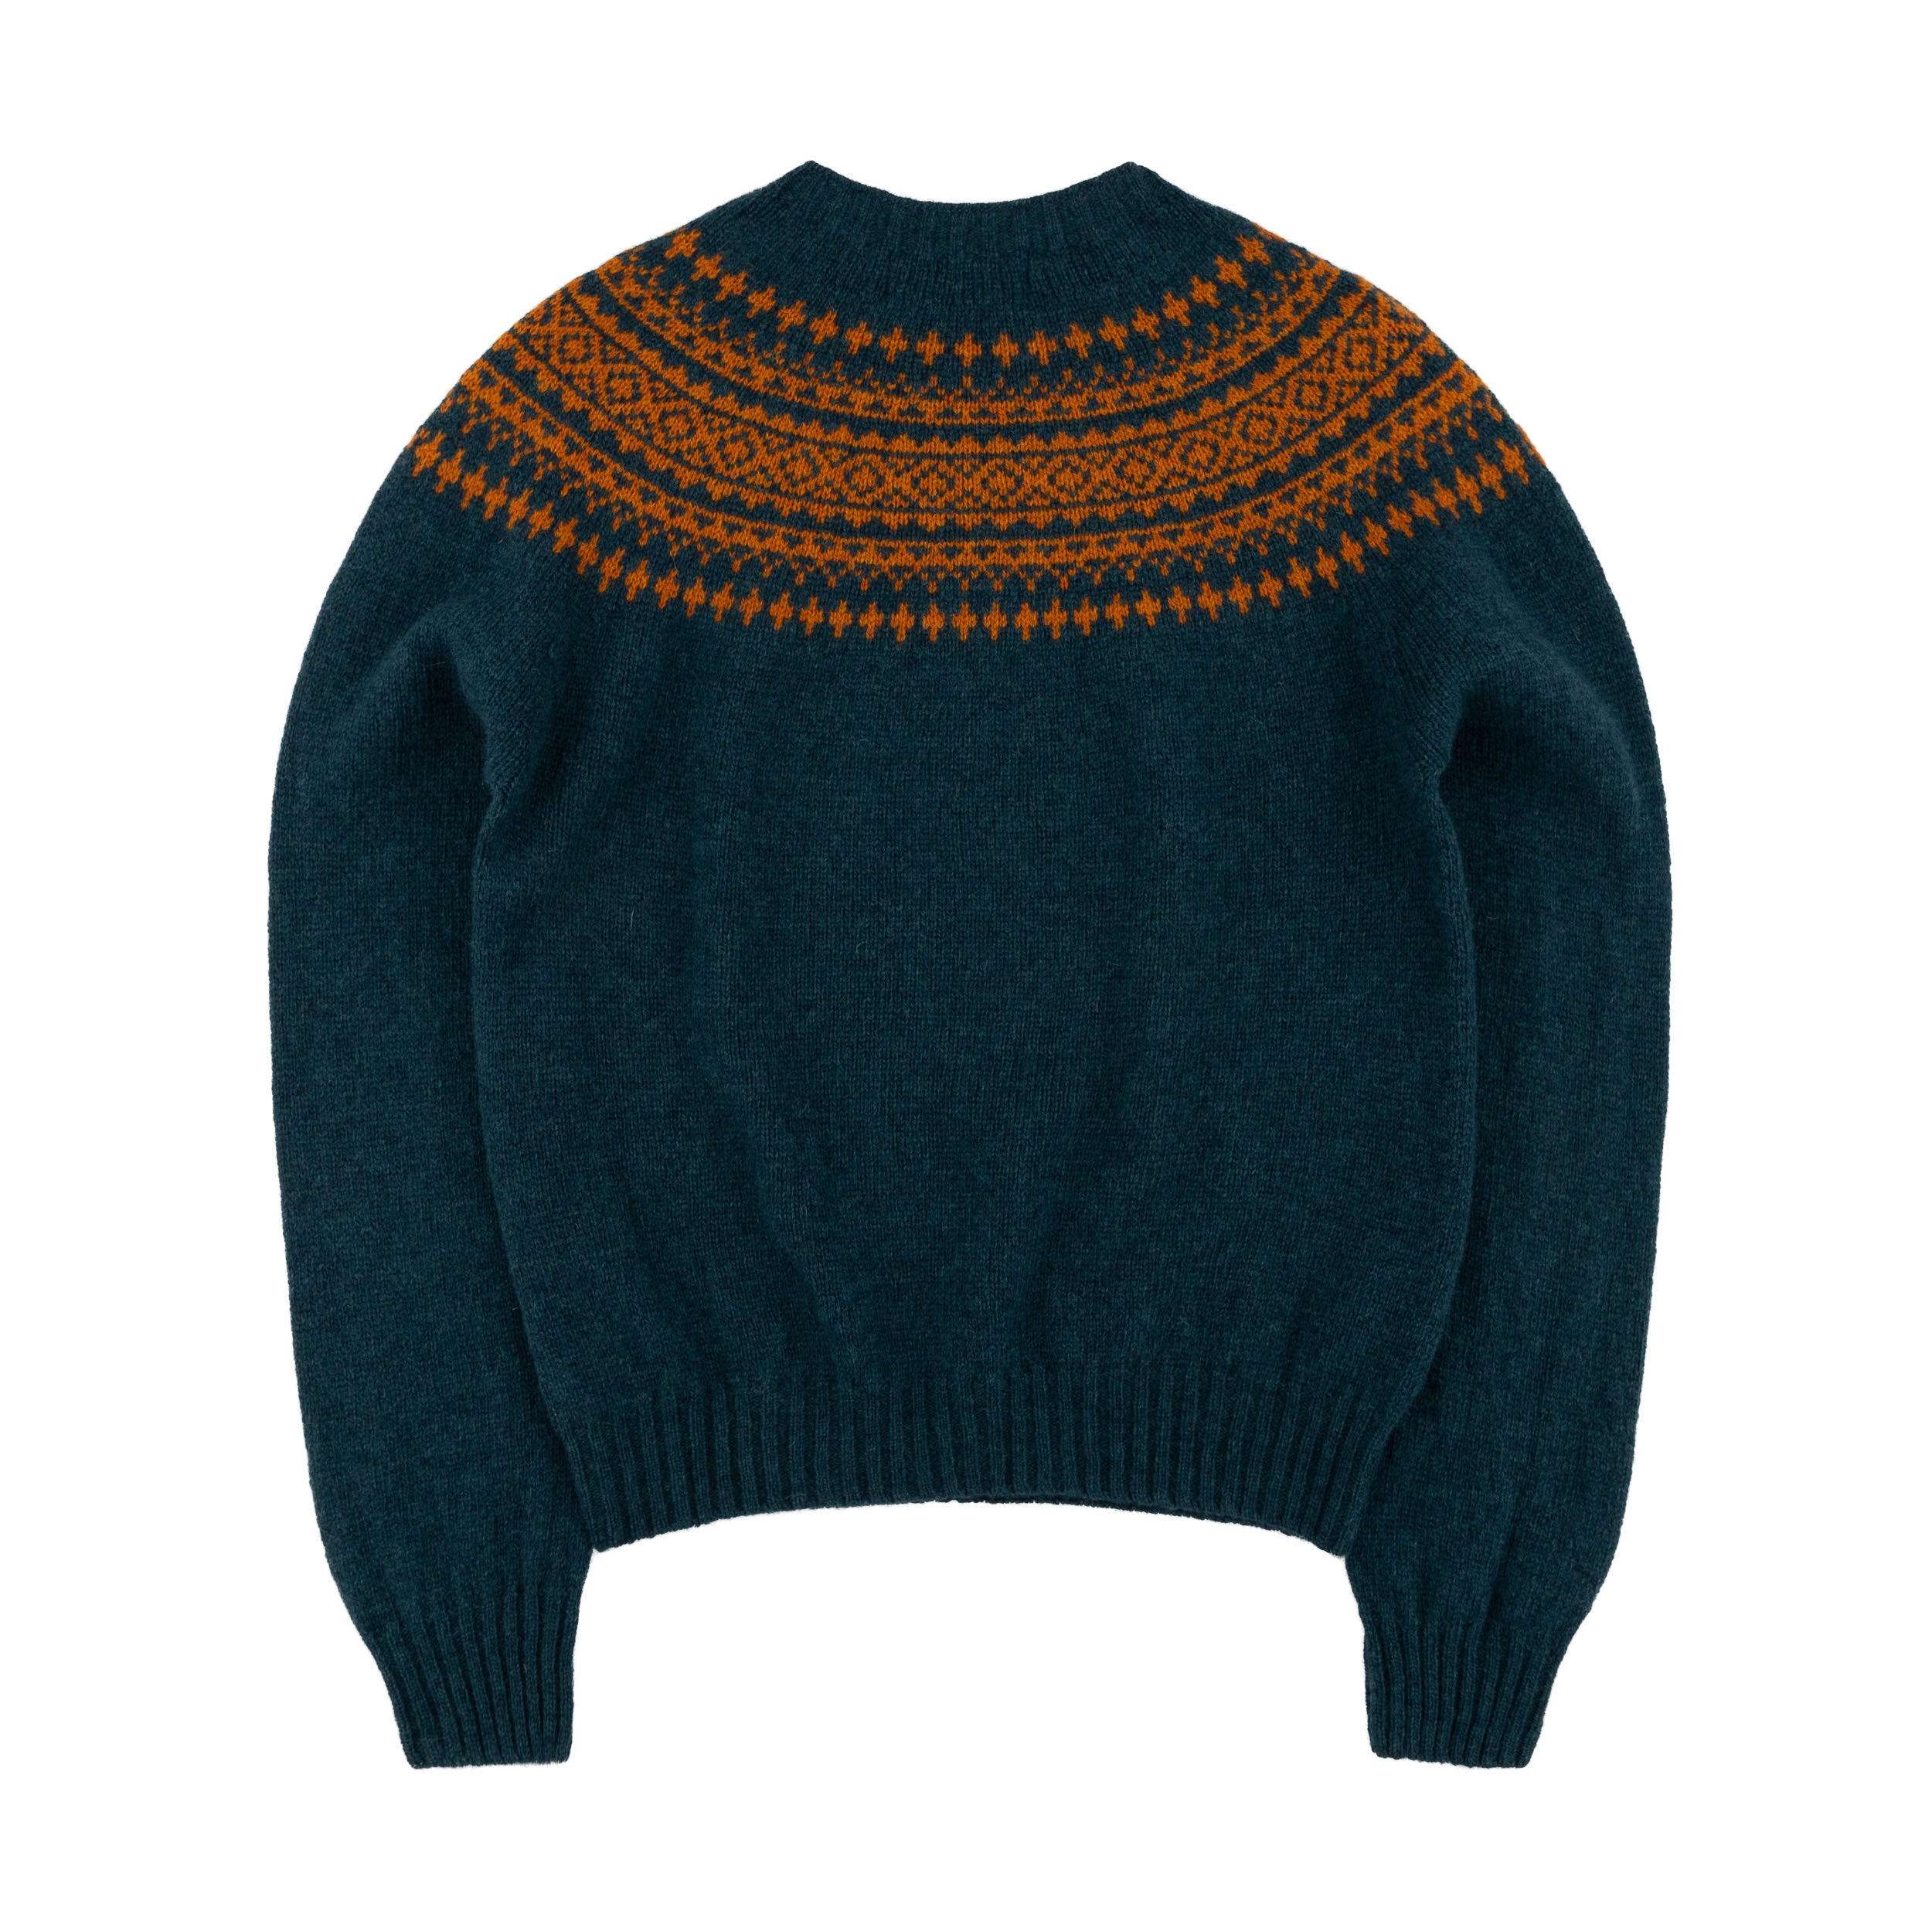 Carrier Company Shetland Lambswool Yoke Jumper in Ginger and Teal